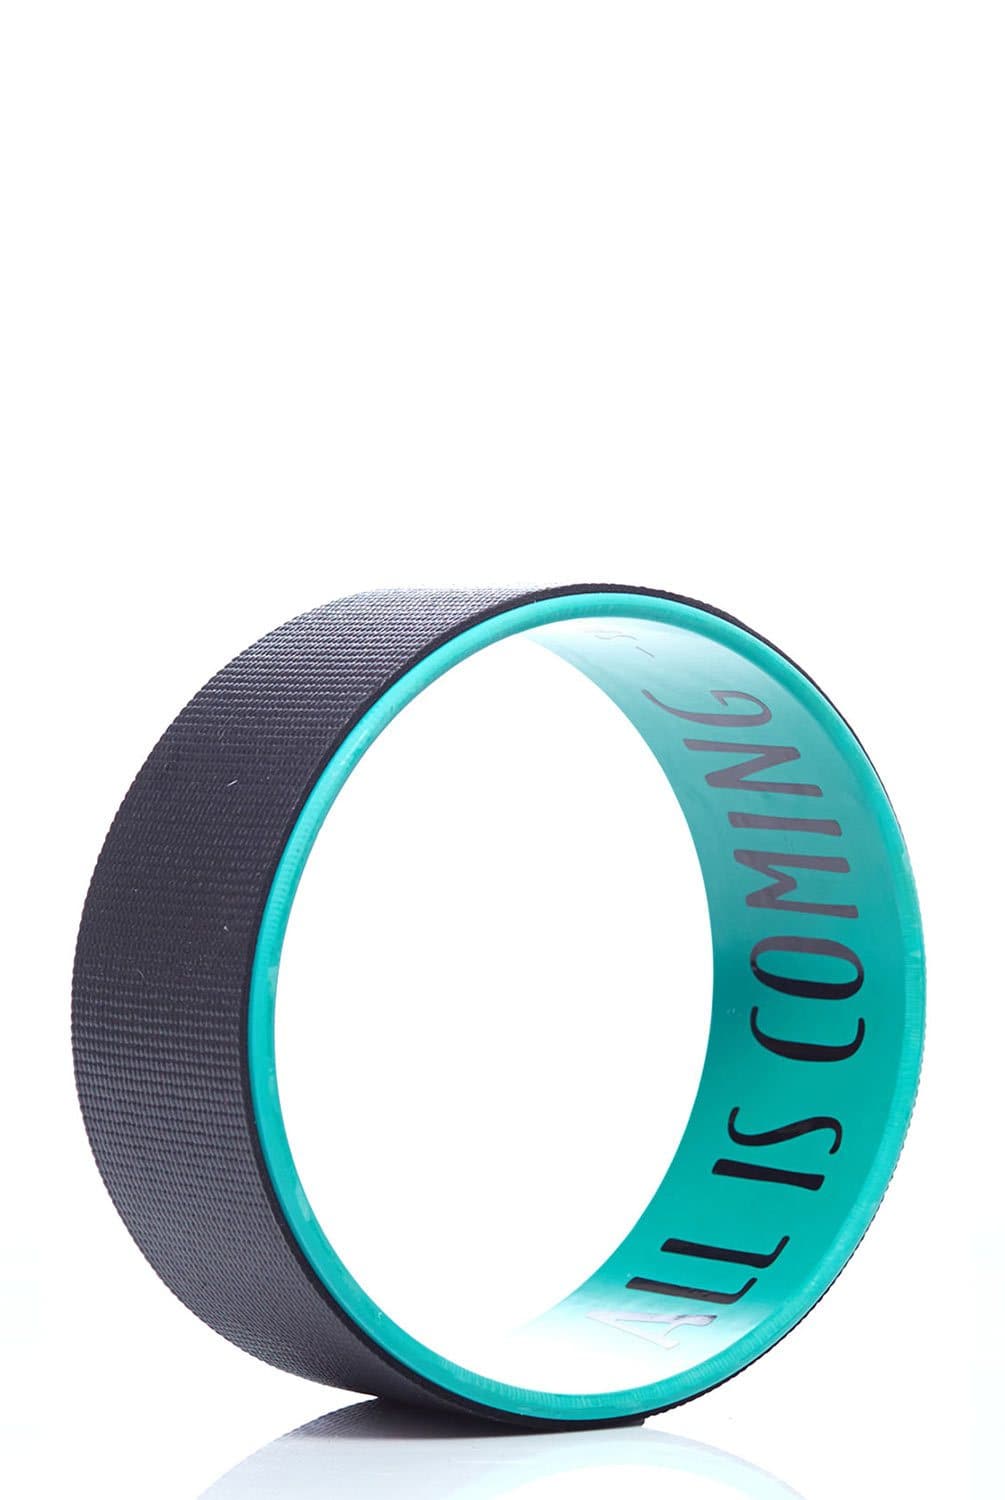 YogiWheel “Practice and all is coming - Evolve Fit Wear